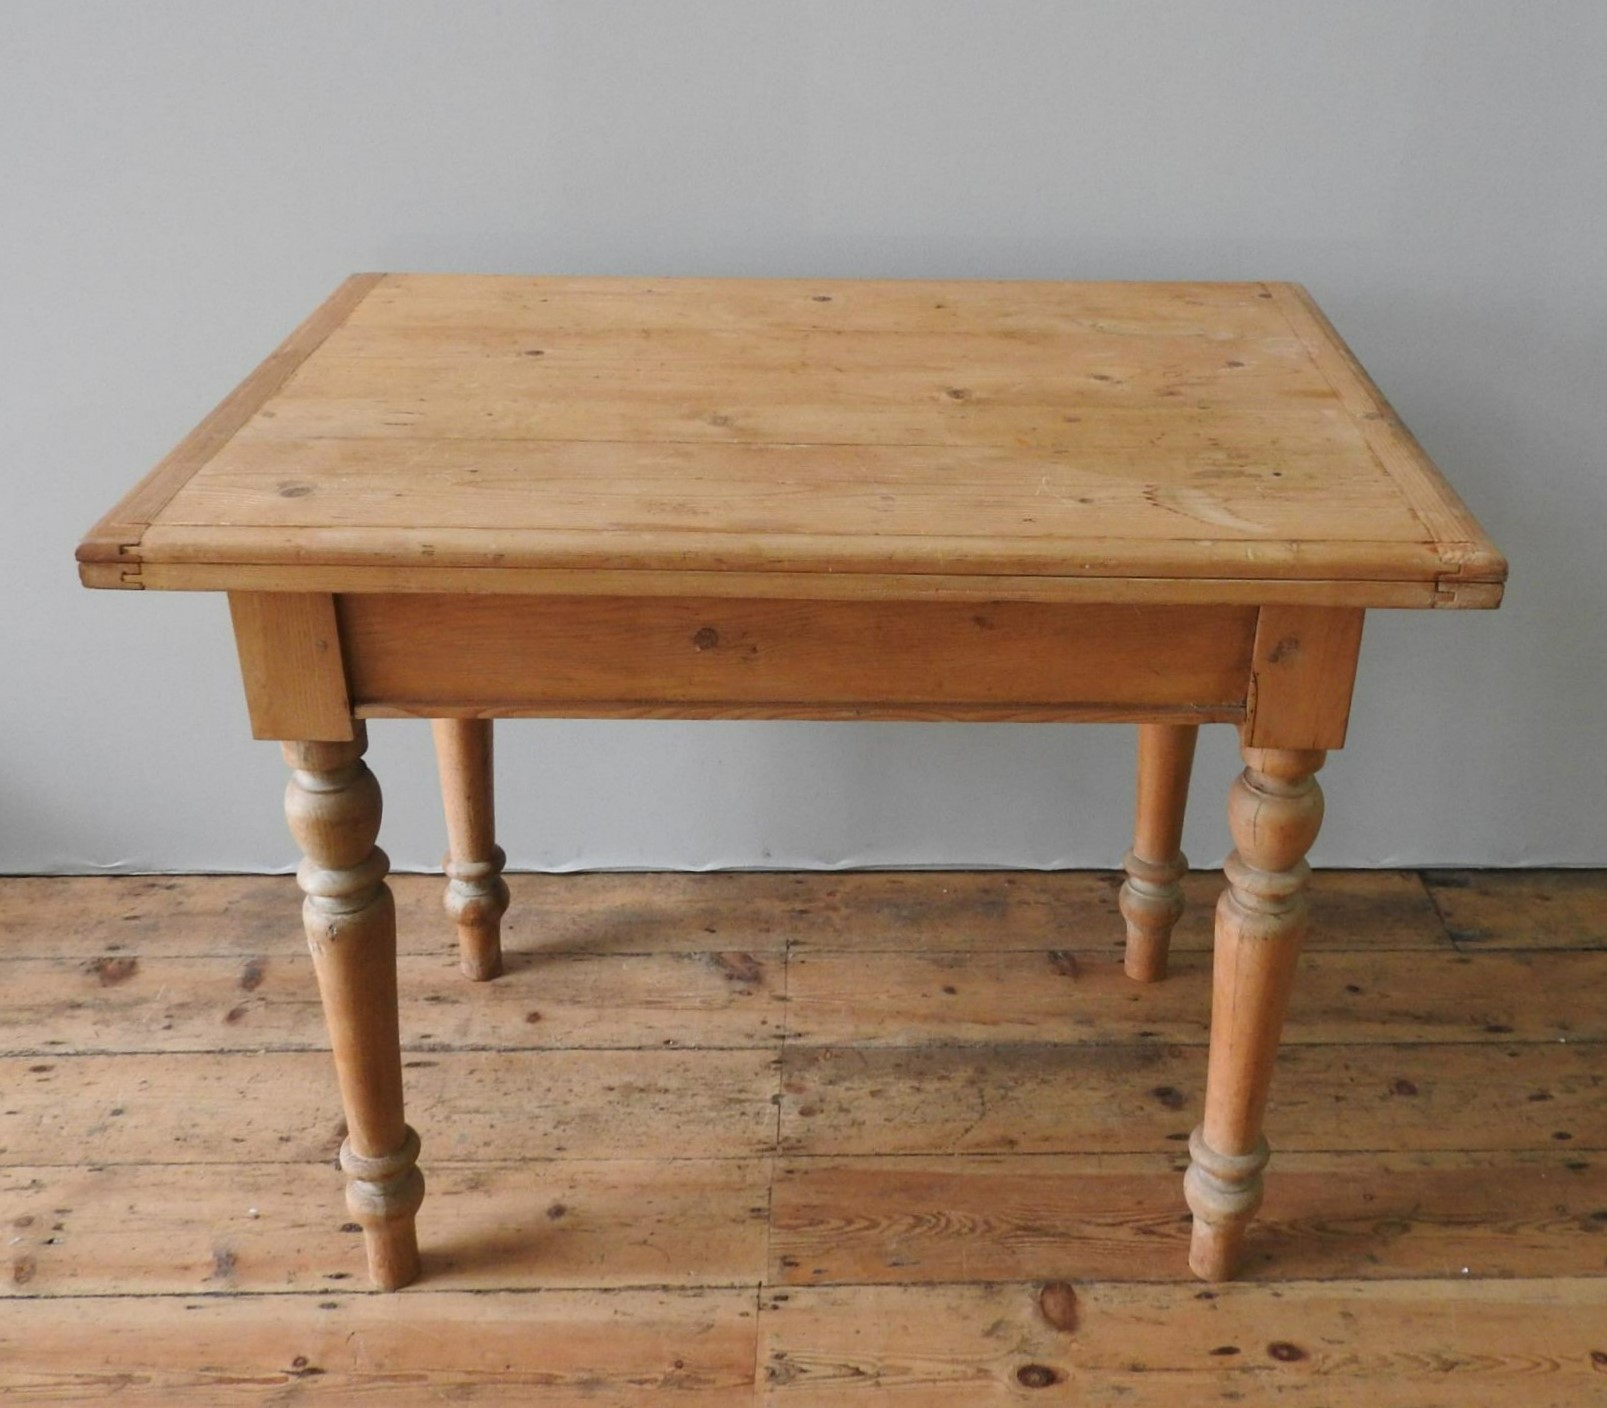 A VICTORIAN WAXED PINE METAMORPHIC KITCHEN TABLE, circa 1880's, with a fold-over swivel top - Image 2 of 4